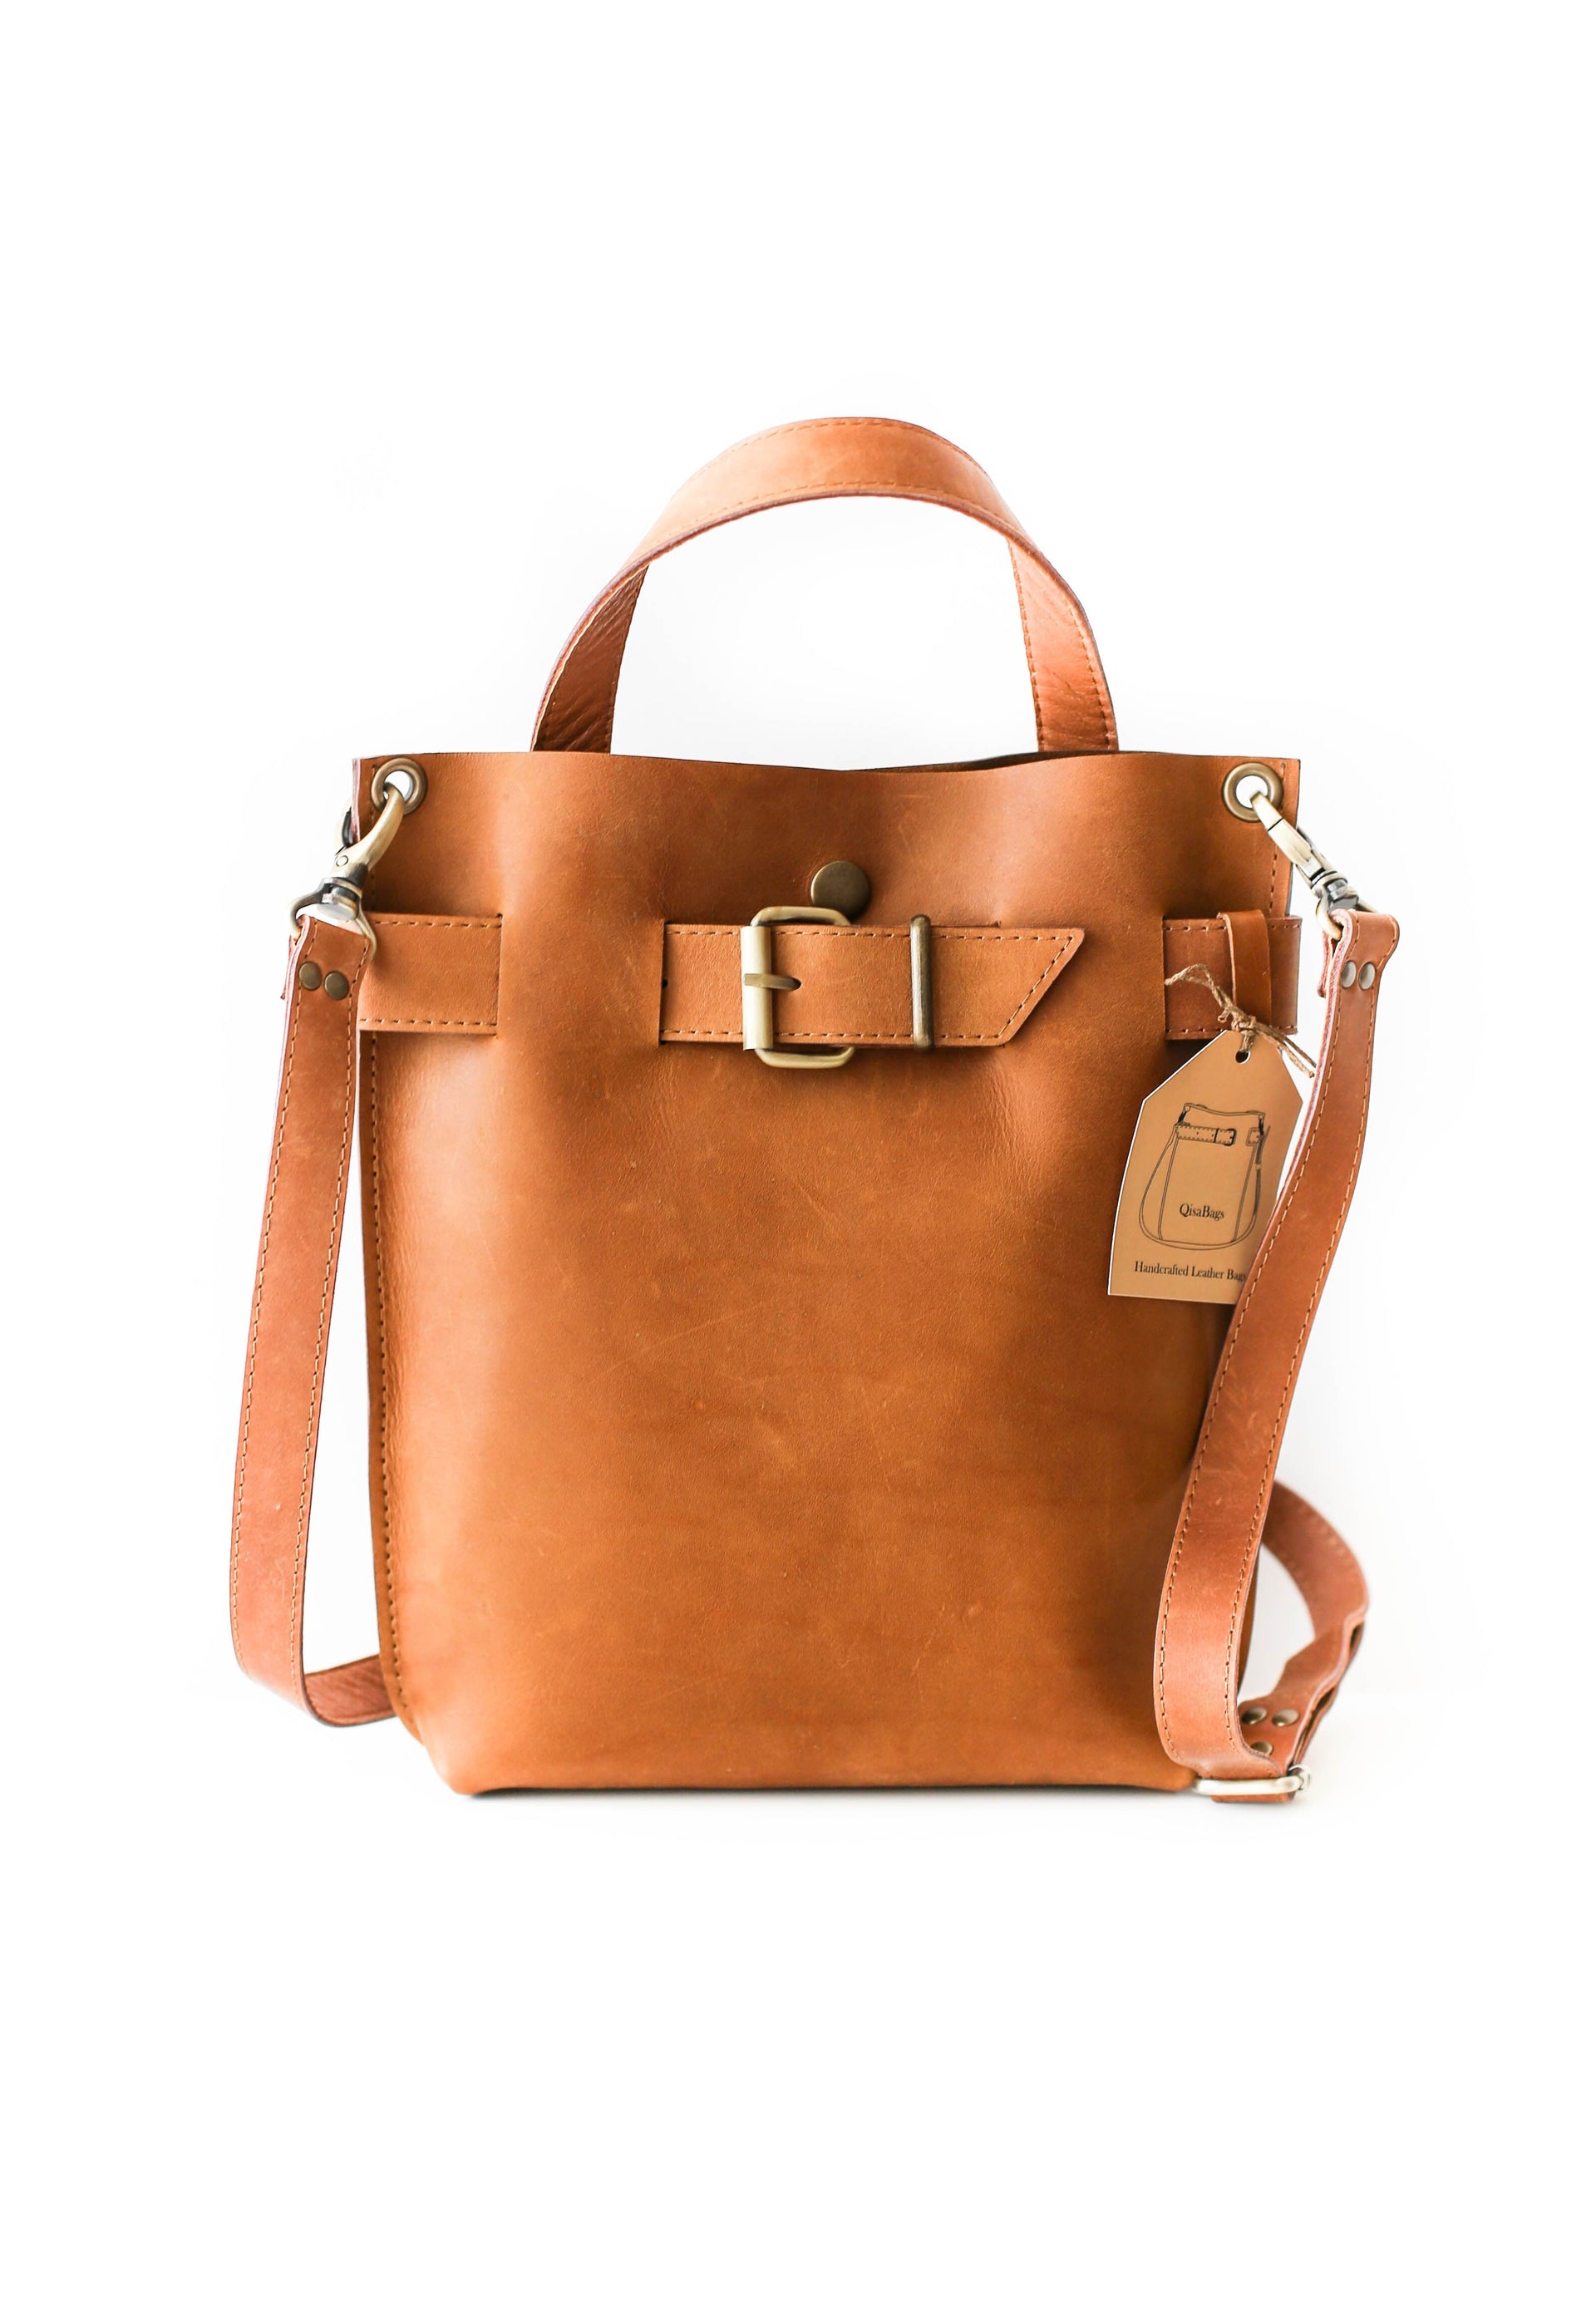 leather bags for women